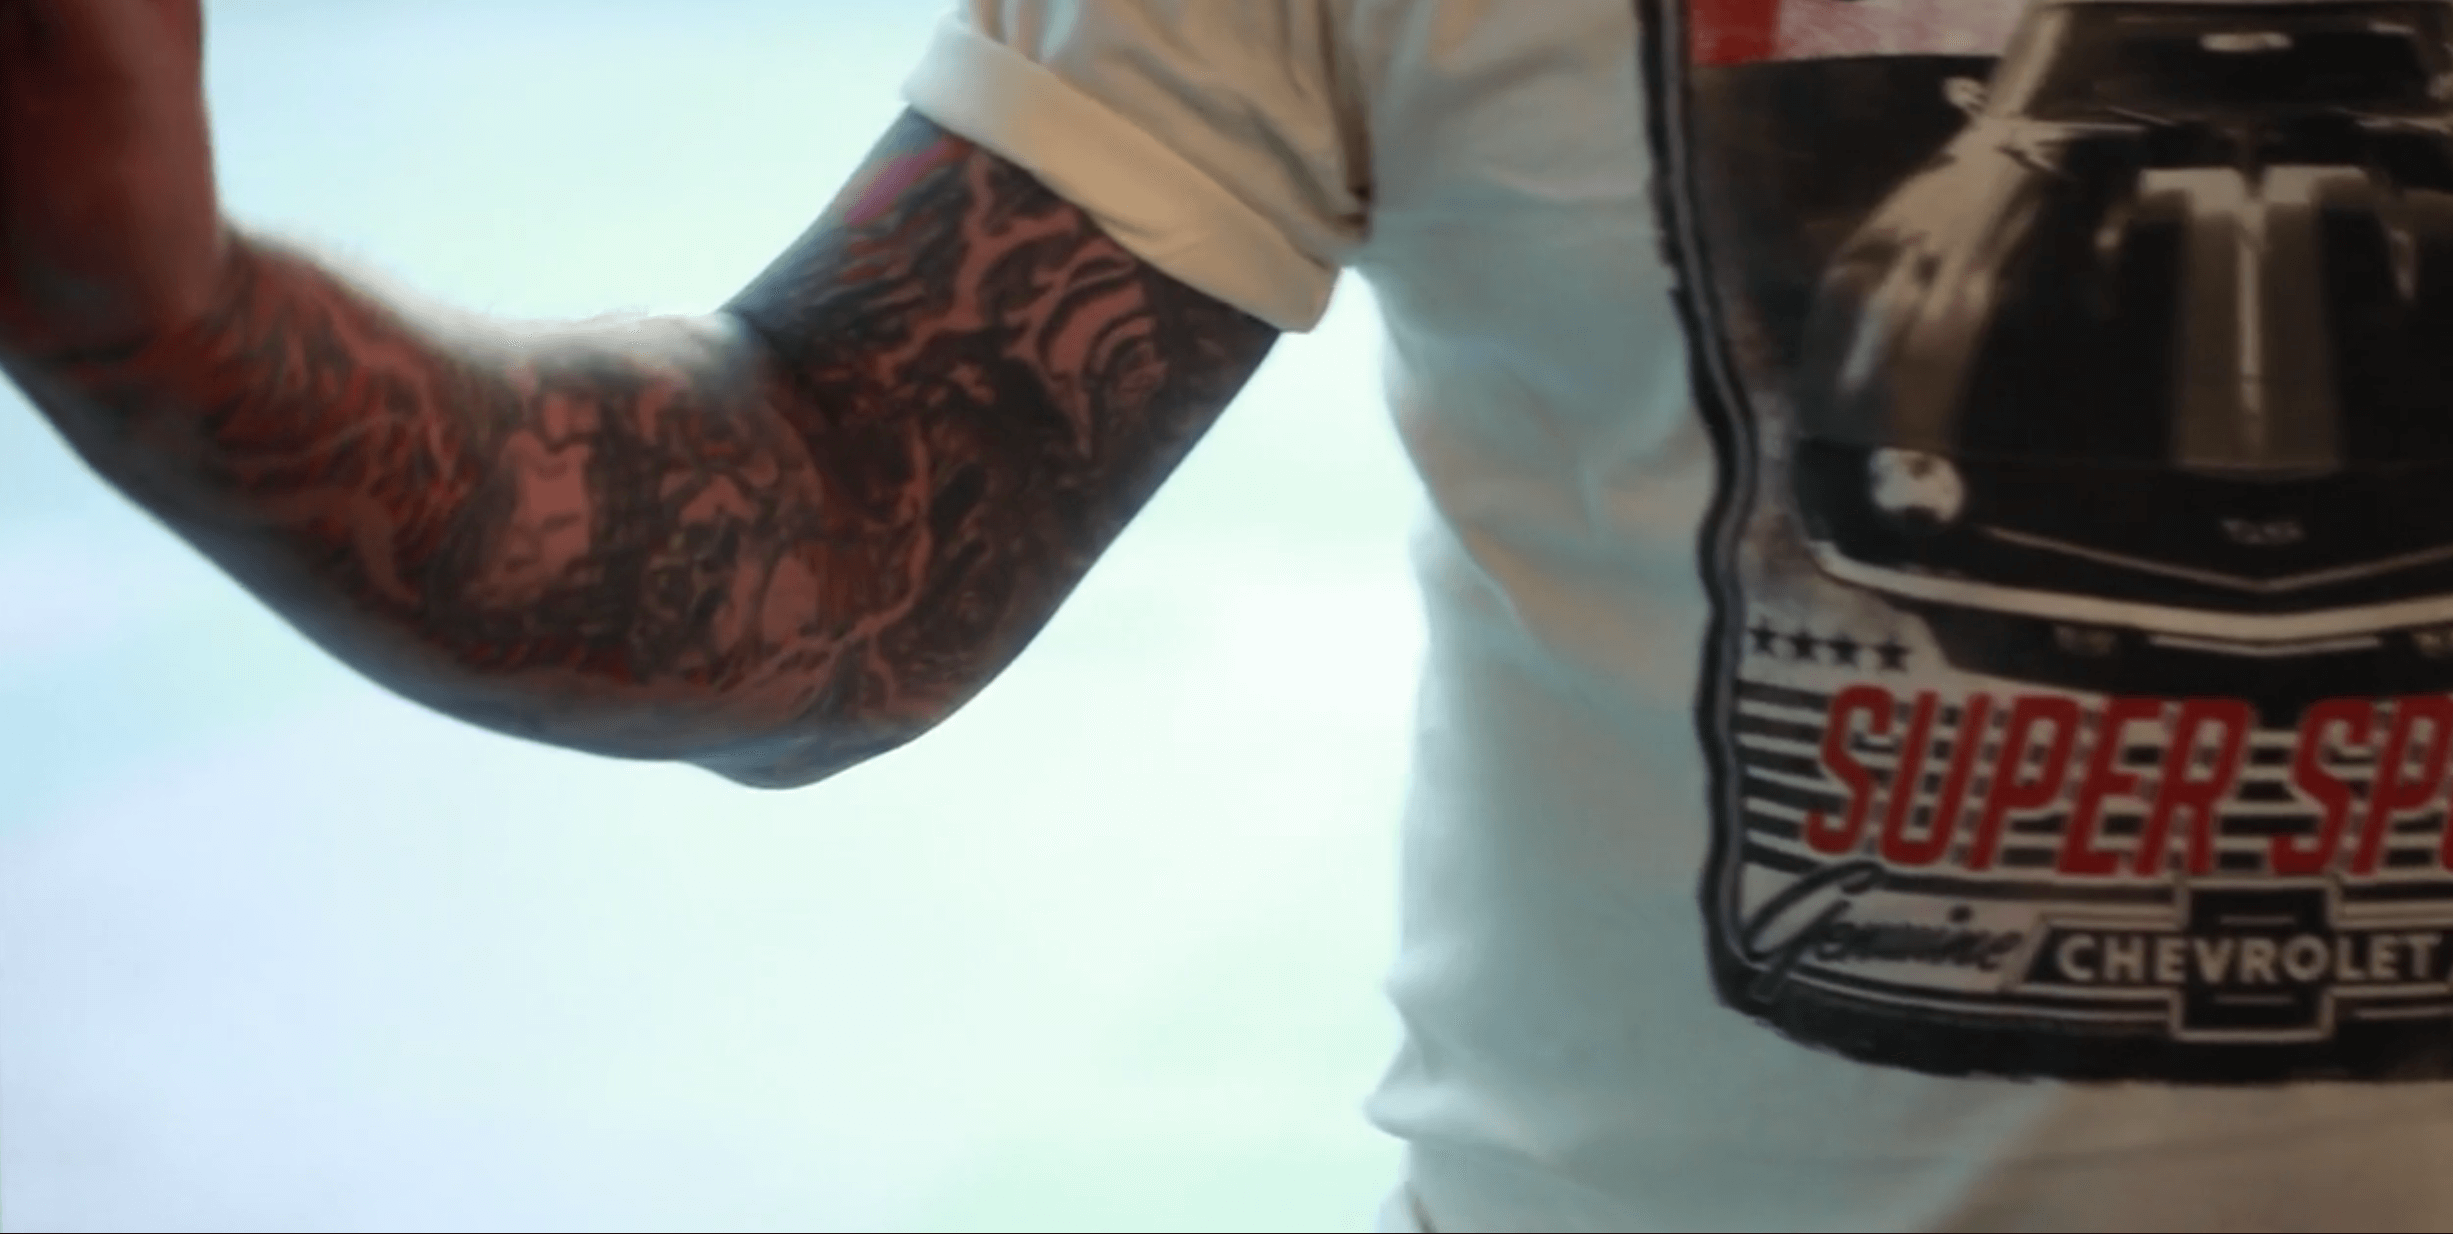 Person's tattooed arm